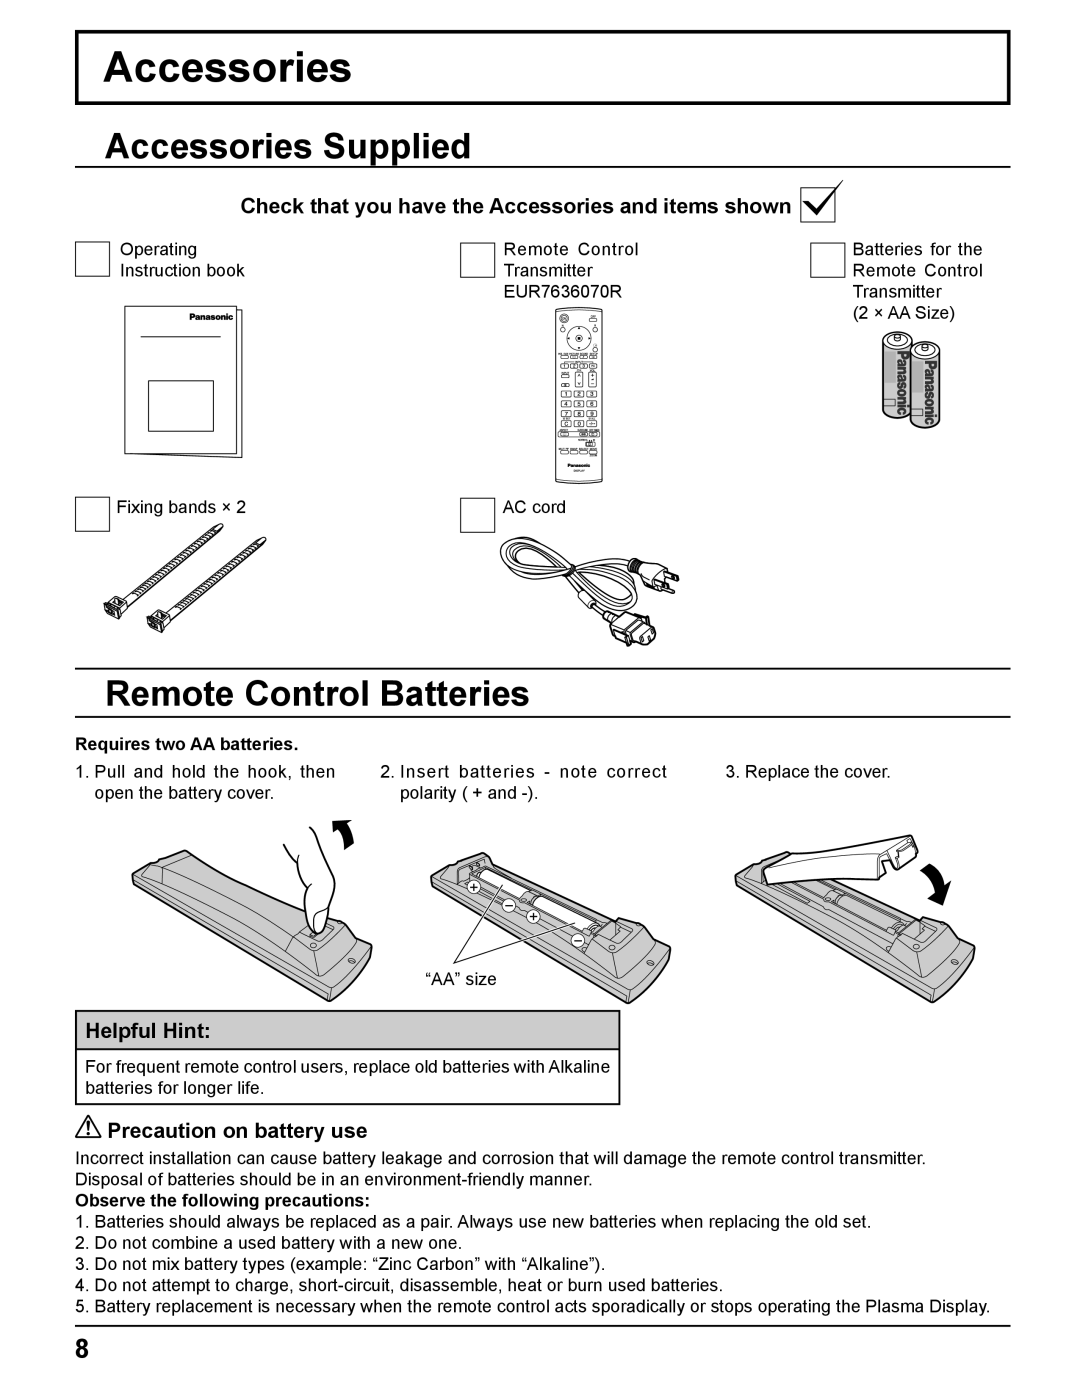 Panasonic TH-37PH10UK manual Accessories Supplied, Remote Control Batteries, Helpful Hint, Precaution on battery use 